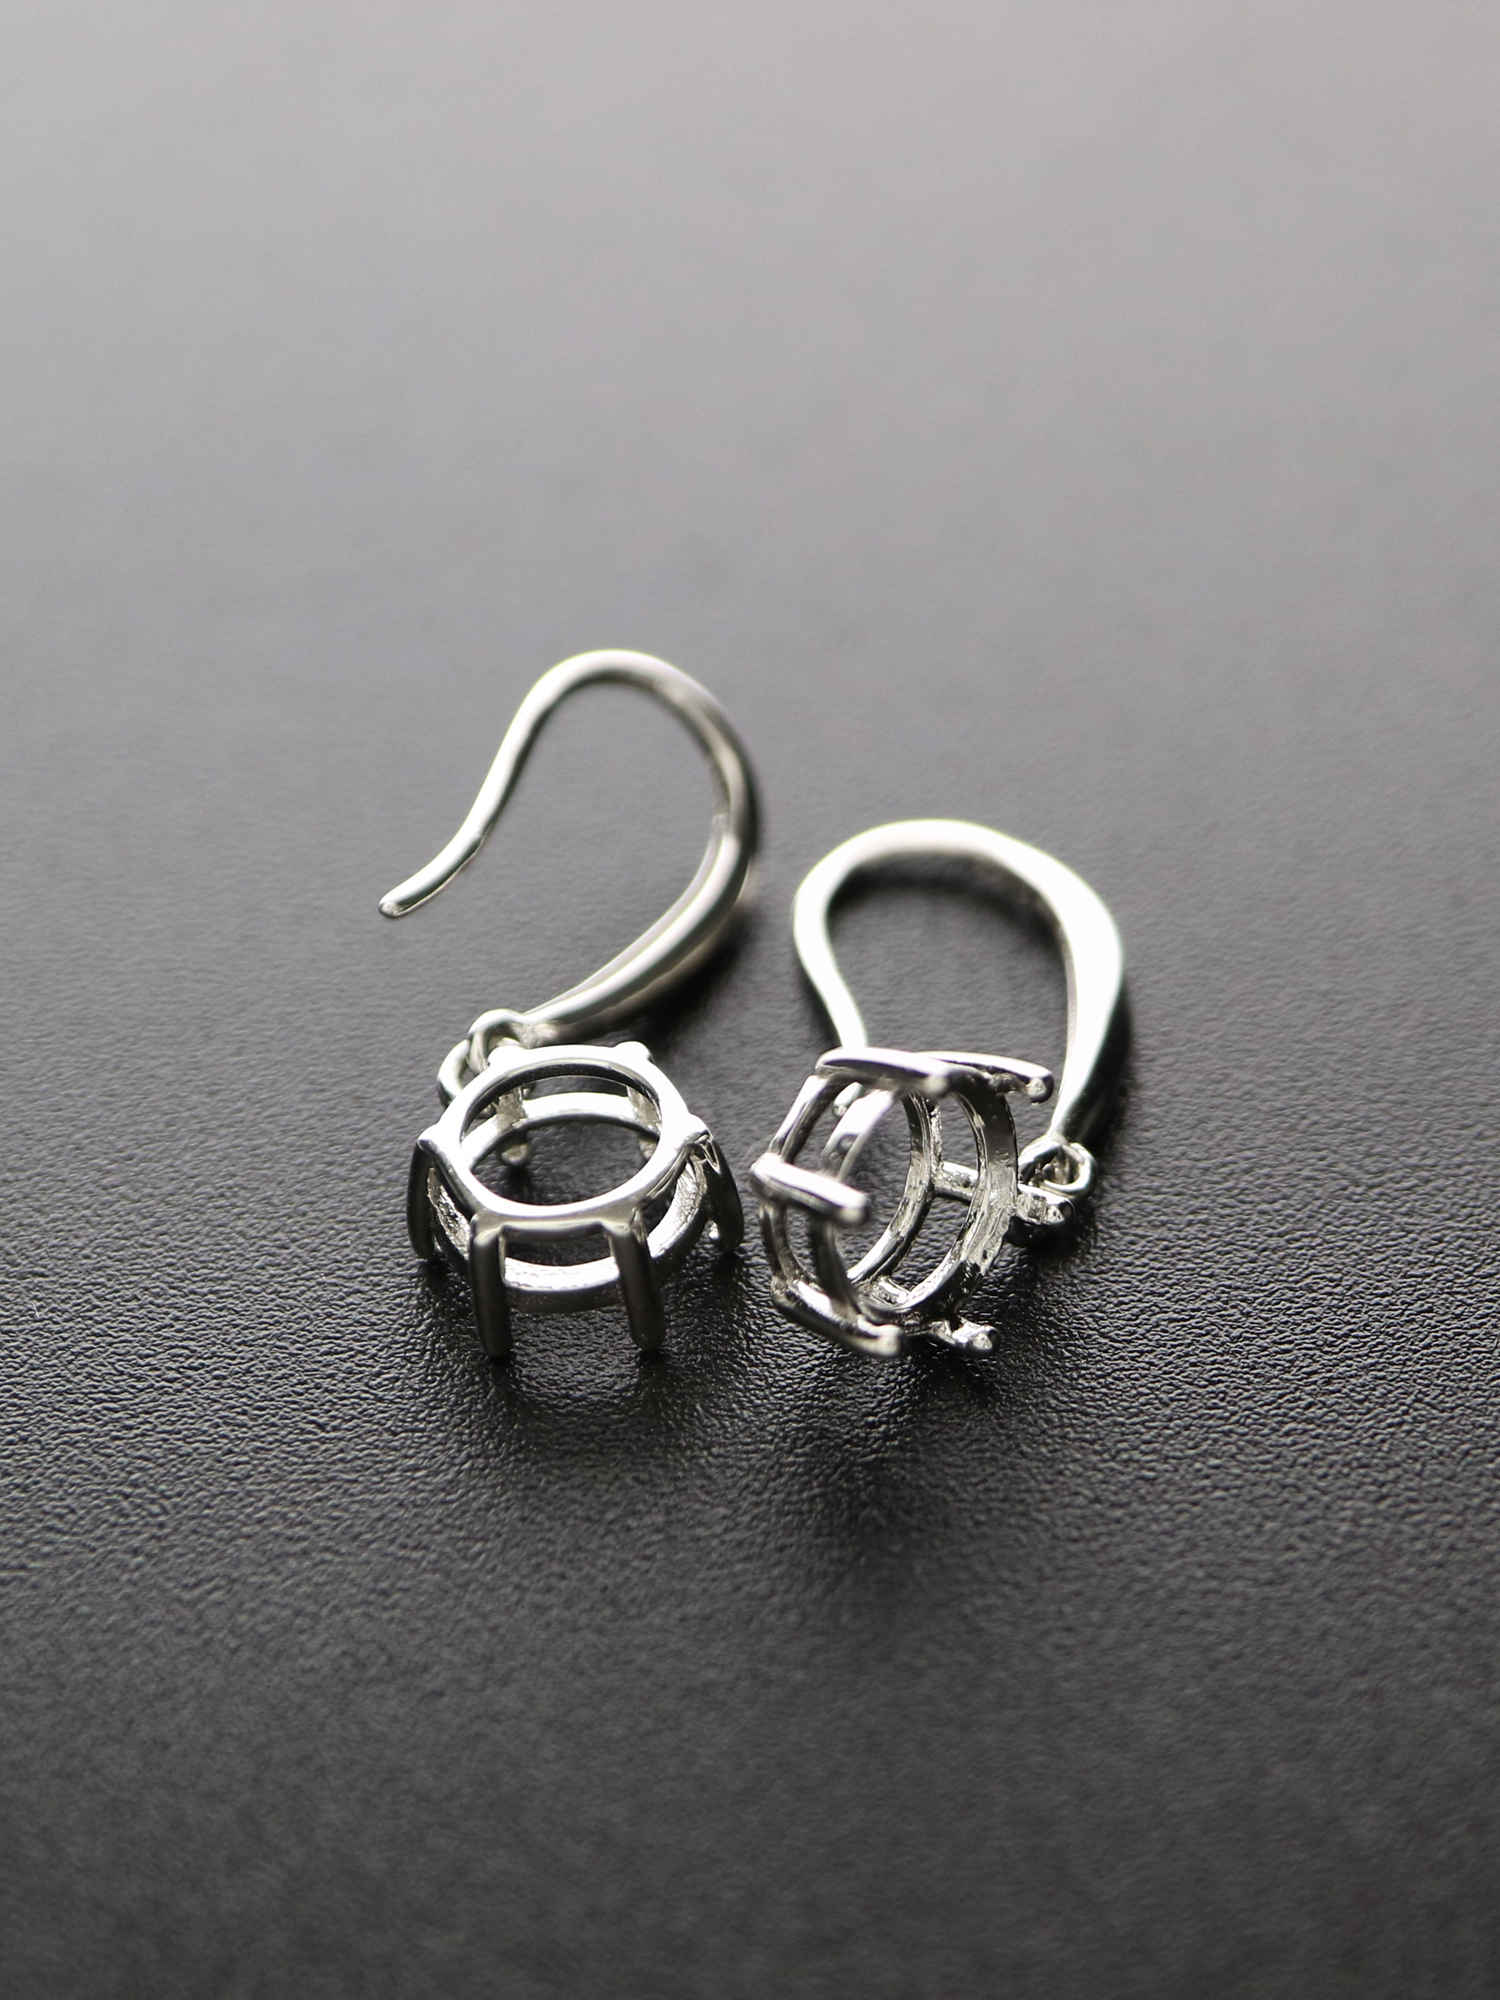 1Pair 5-8MM Round Solid 925 Sterling Silver DIY Prong Hook Earrings Settings Bezel 1702196 - Click Image to Close